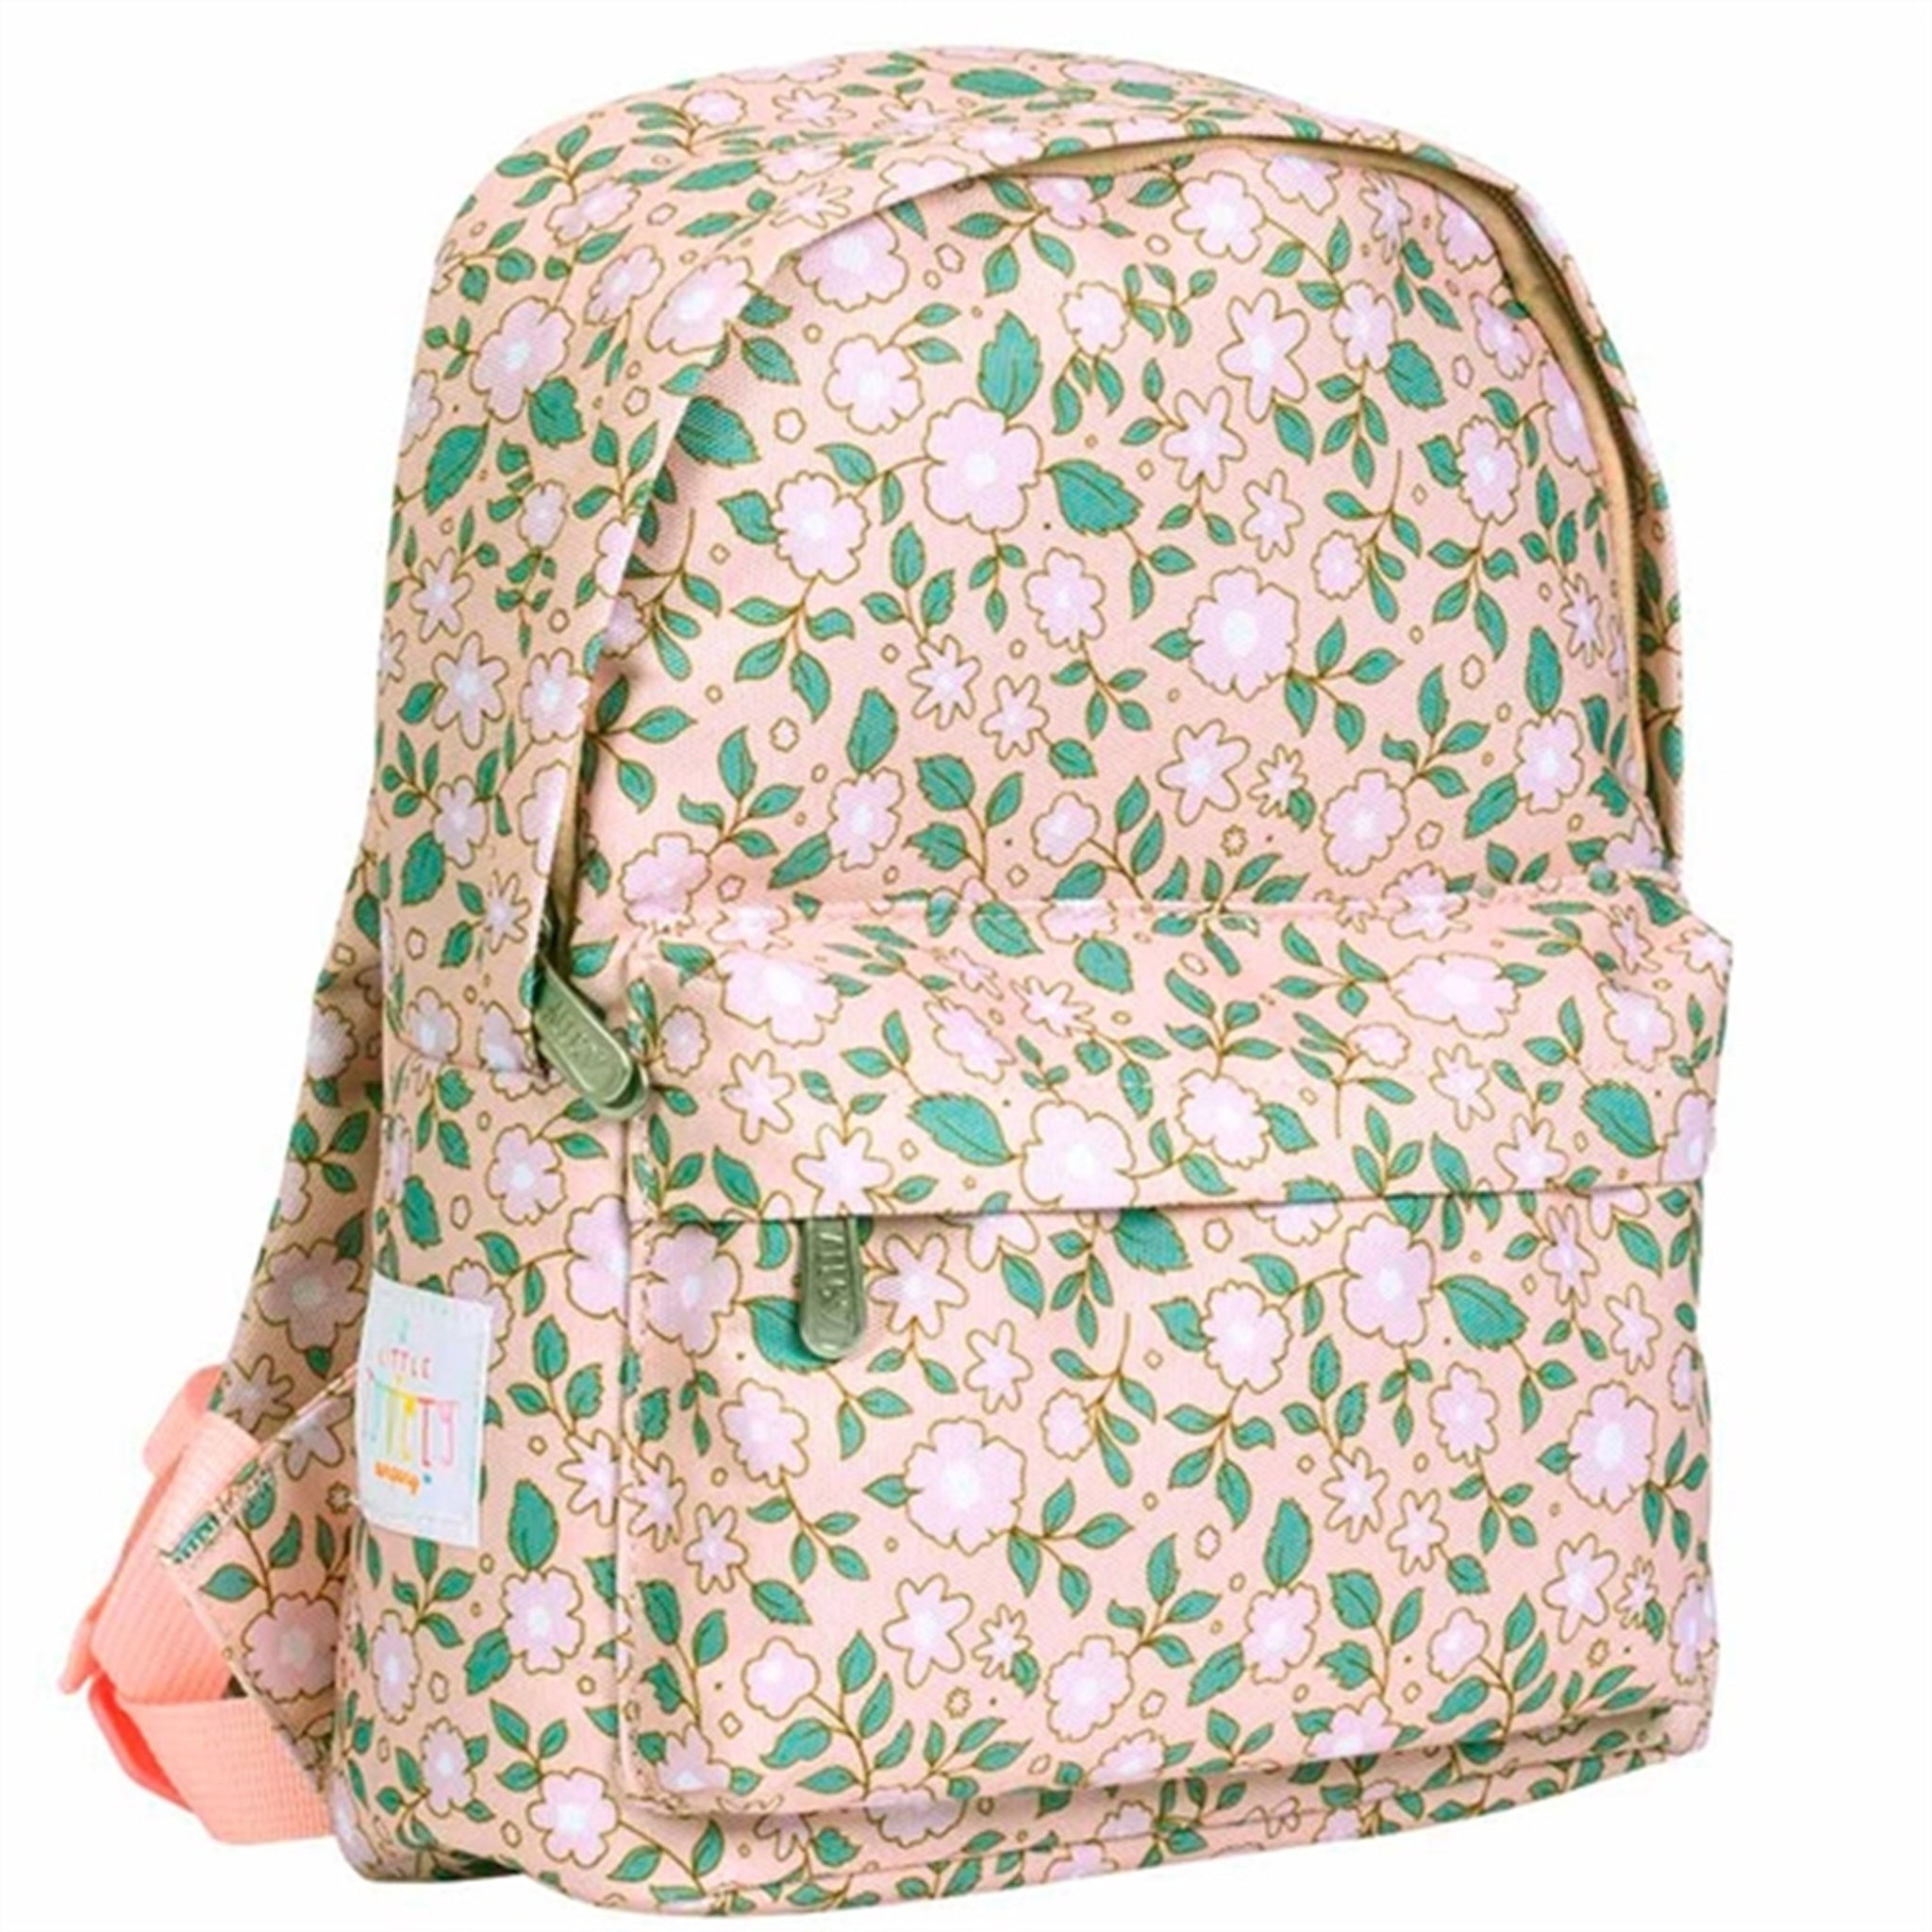 A Little Lovely Company Backpack Small Blossom Pink 2